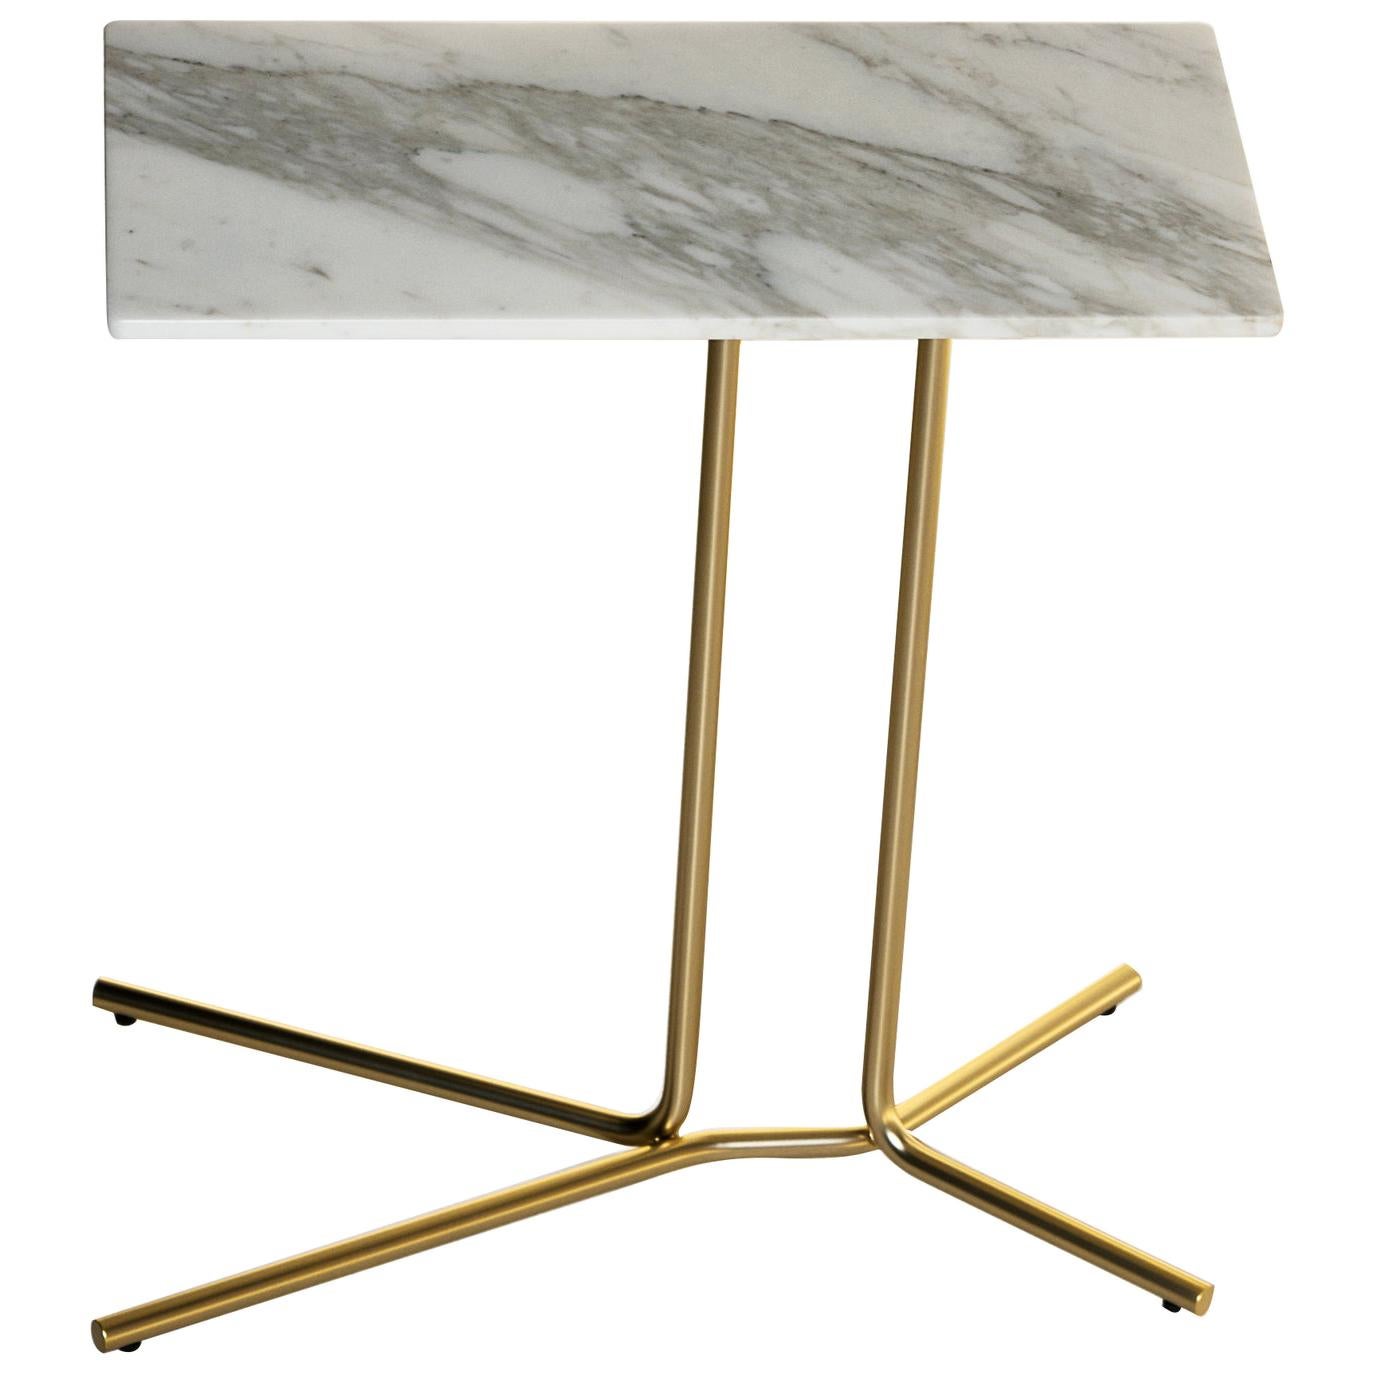 Tacchini Ledge Marble Side Table Designed by Gordon Guillaumier